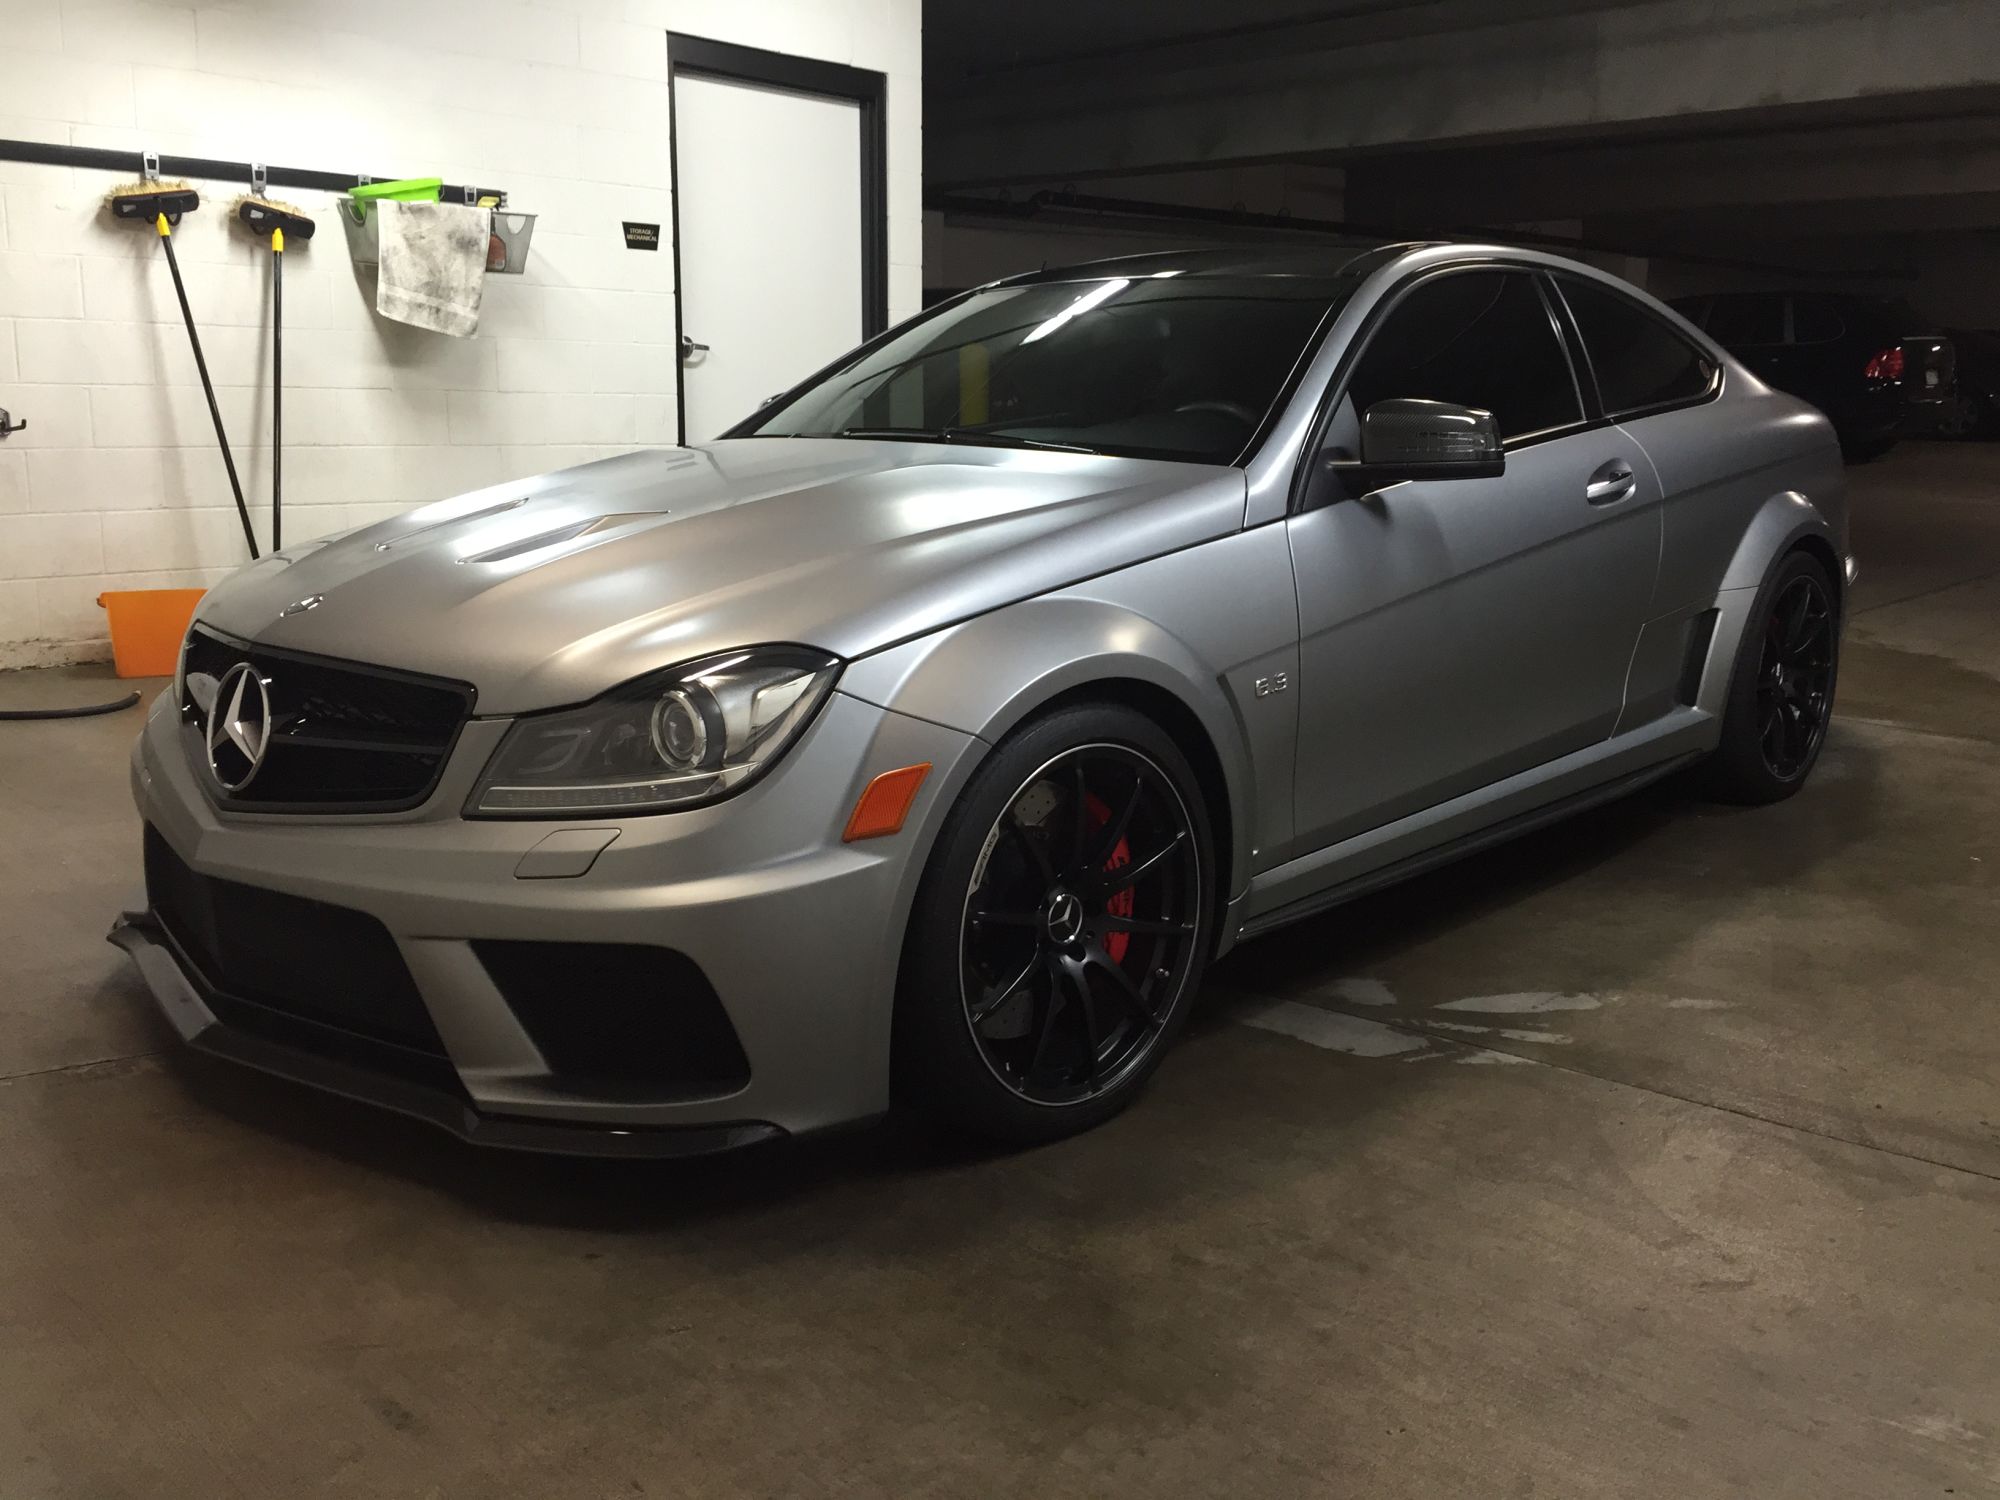 2012 Mercedes-Benz C63 AMG Black Series Coupe | German Cars For Sale Blog